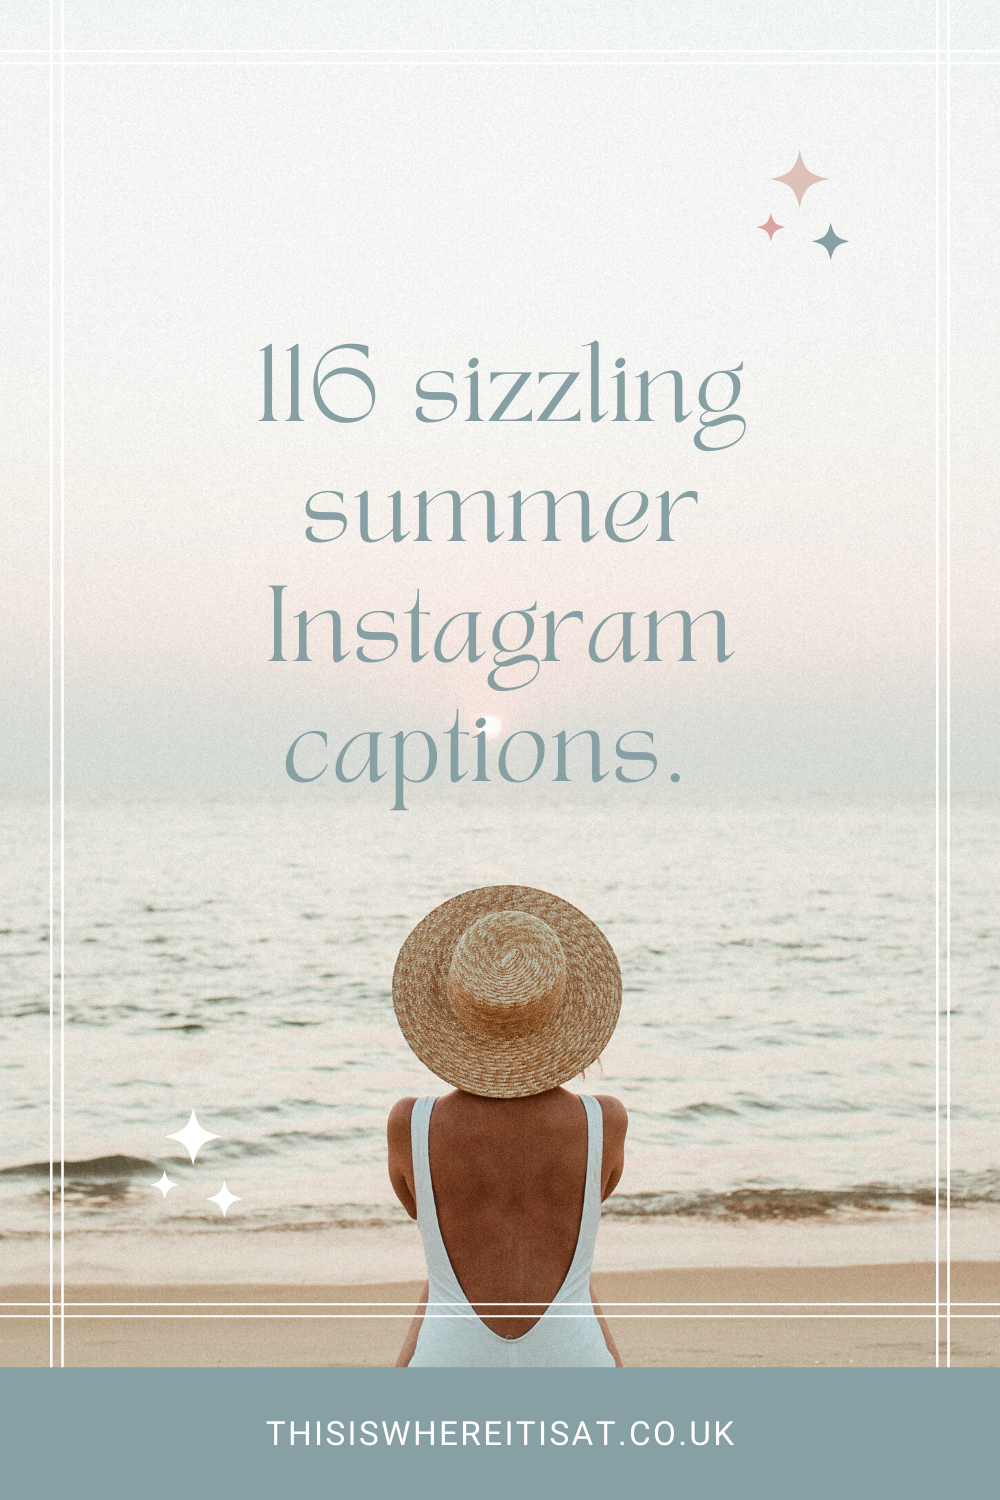 116 sizzling summer Instagram captions. THIS IS WHERE IT IS AT